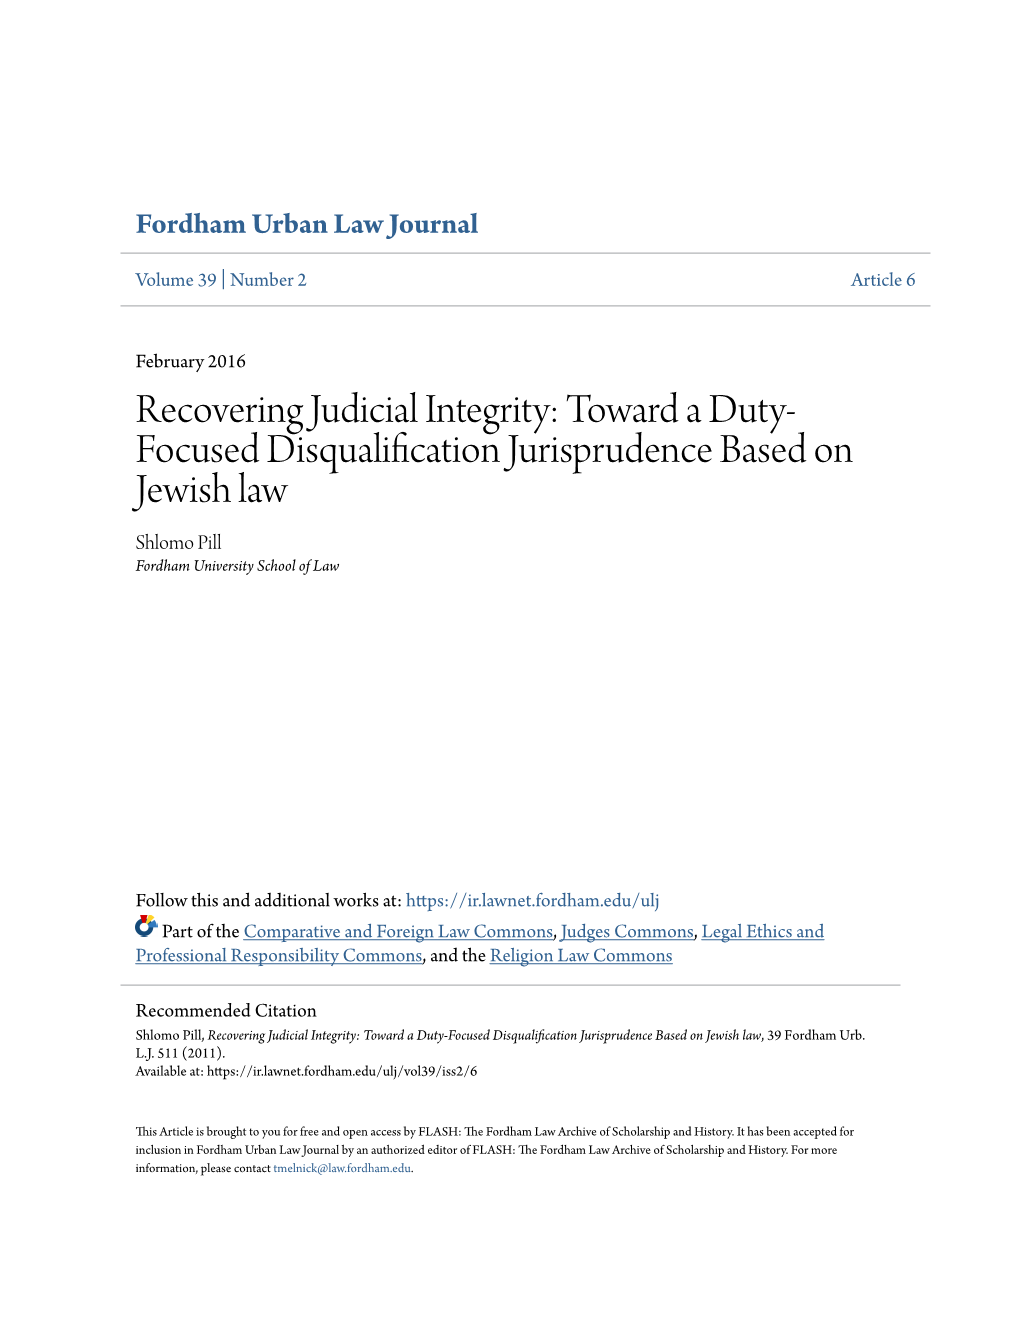 Recovering Judicial Integrity: Toward a Duty-Focused Disqualification Jurisprudence Based on Jewish Law, 39 Fordham Urb